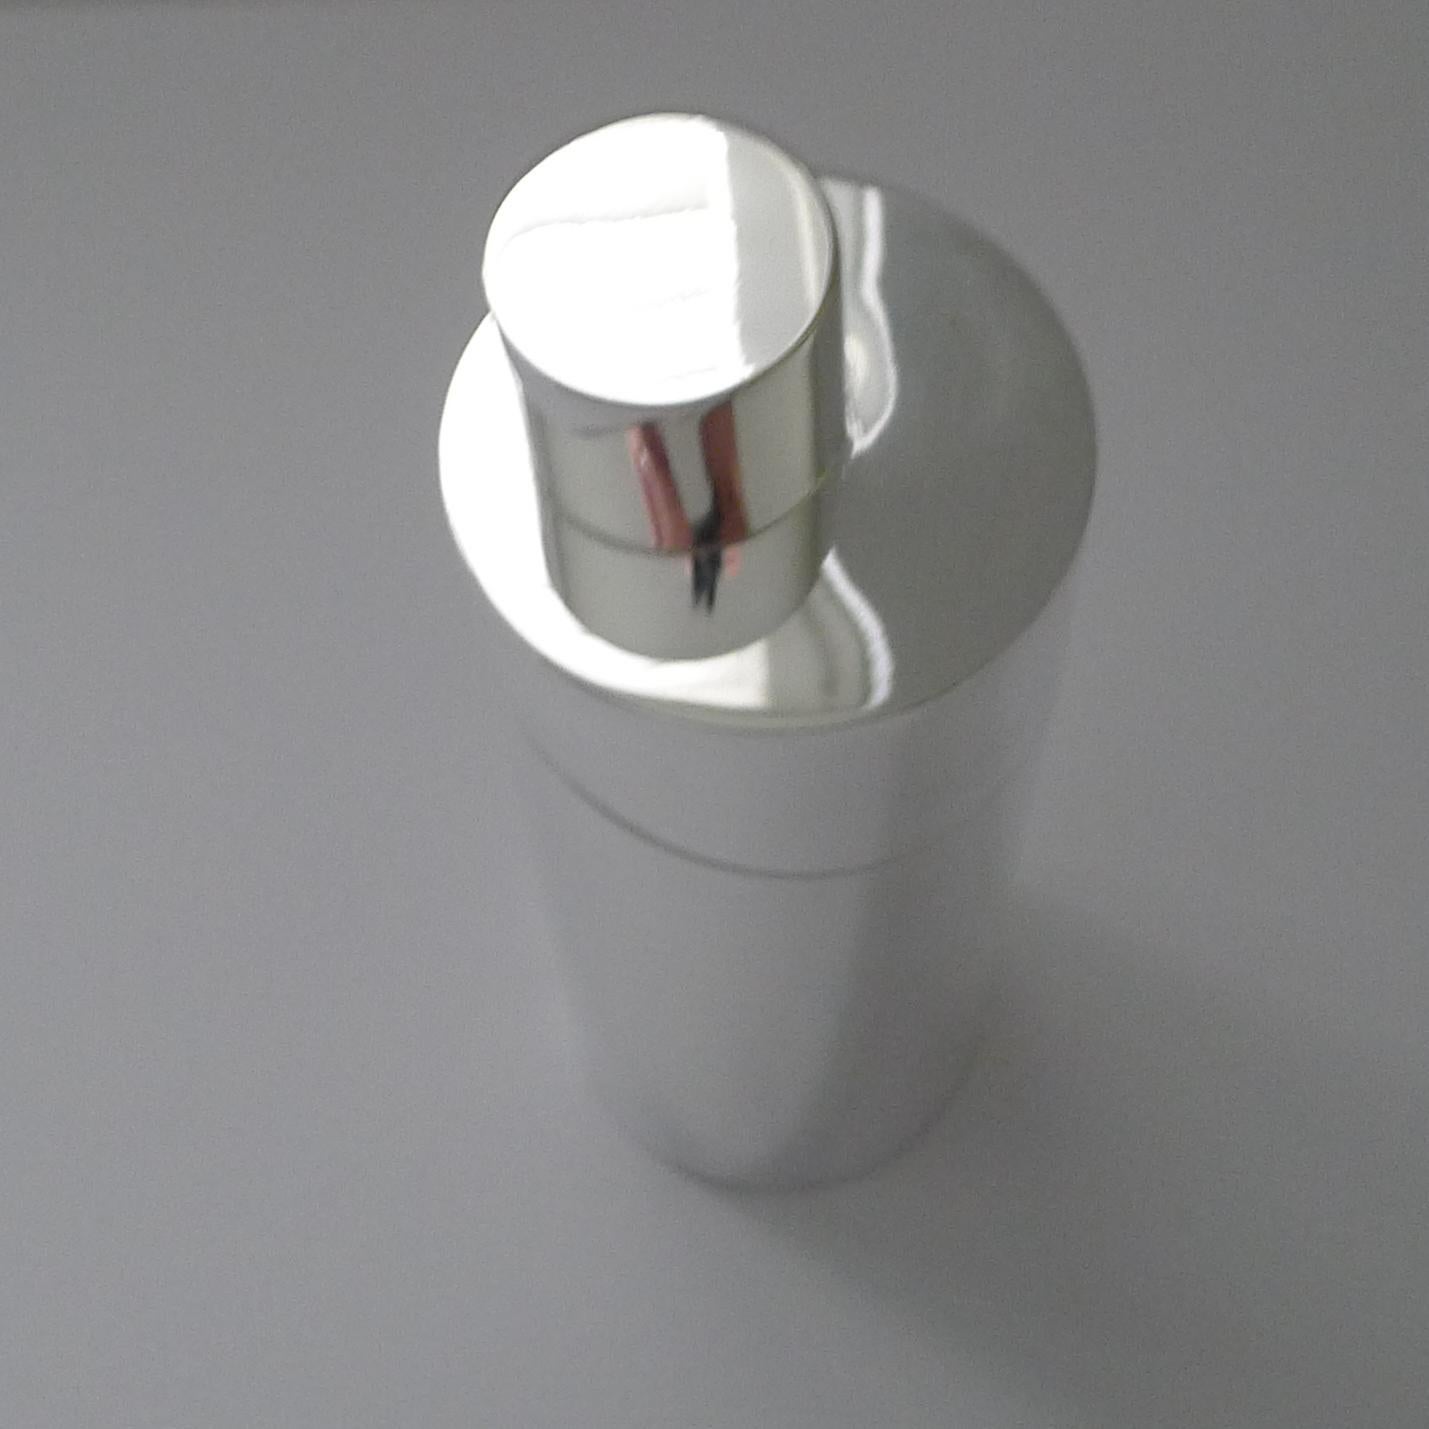 A stunning modernist cocktail shaker designed by the world famous Lino Sabattini for famous Orfevrerie Christofle, a magical combination of quality and minimalist design.

Created as part of the Gallia range, the design is known as Windsor and was